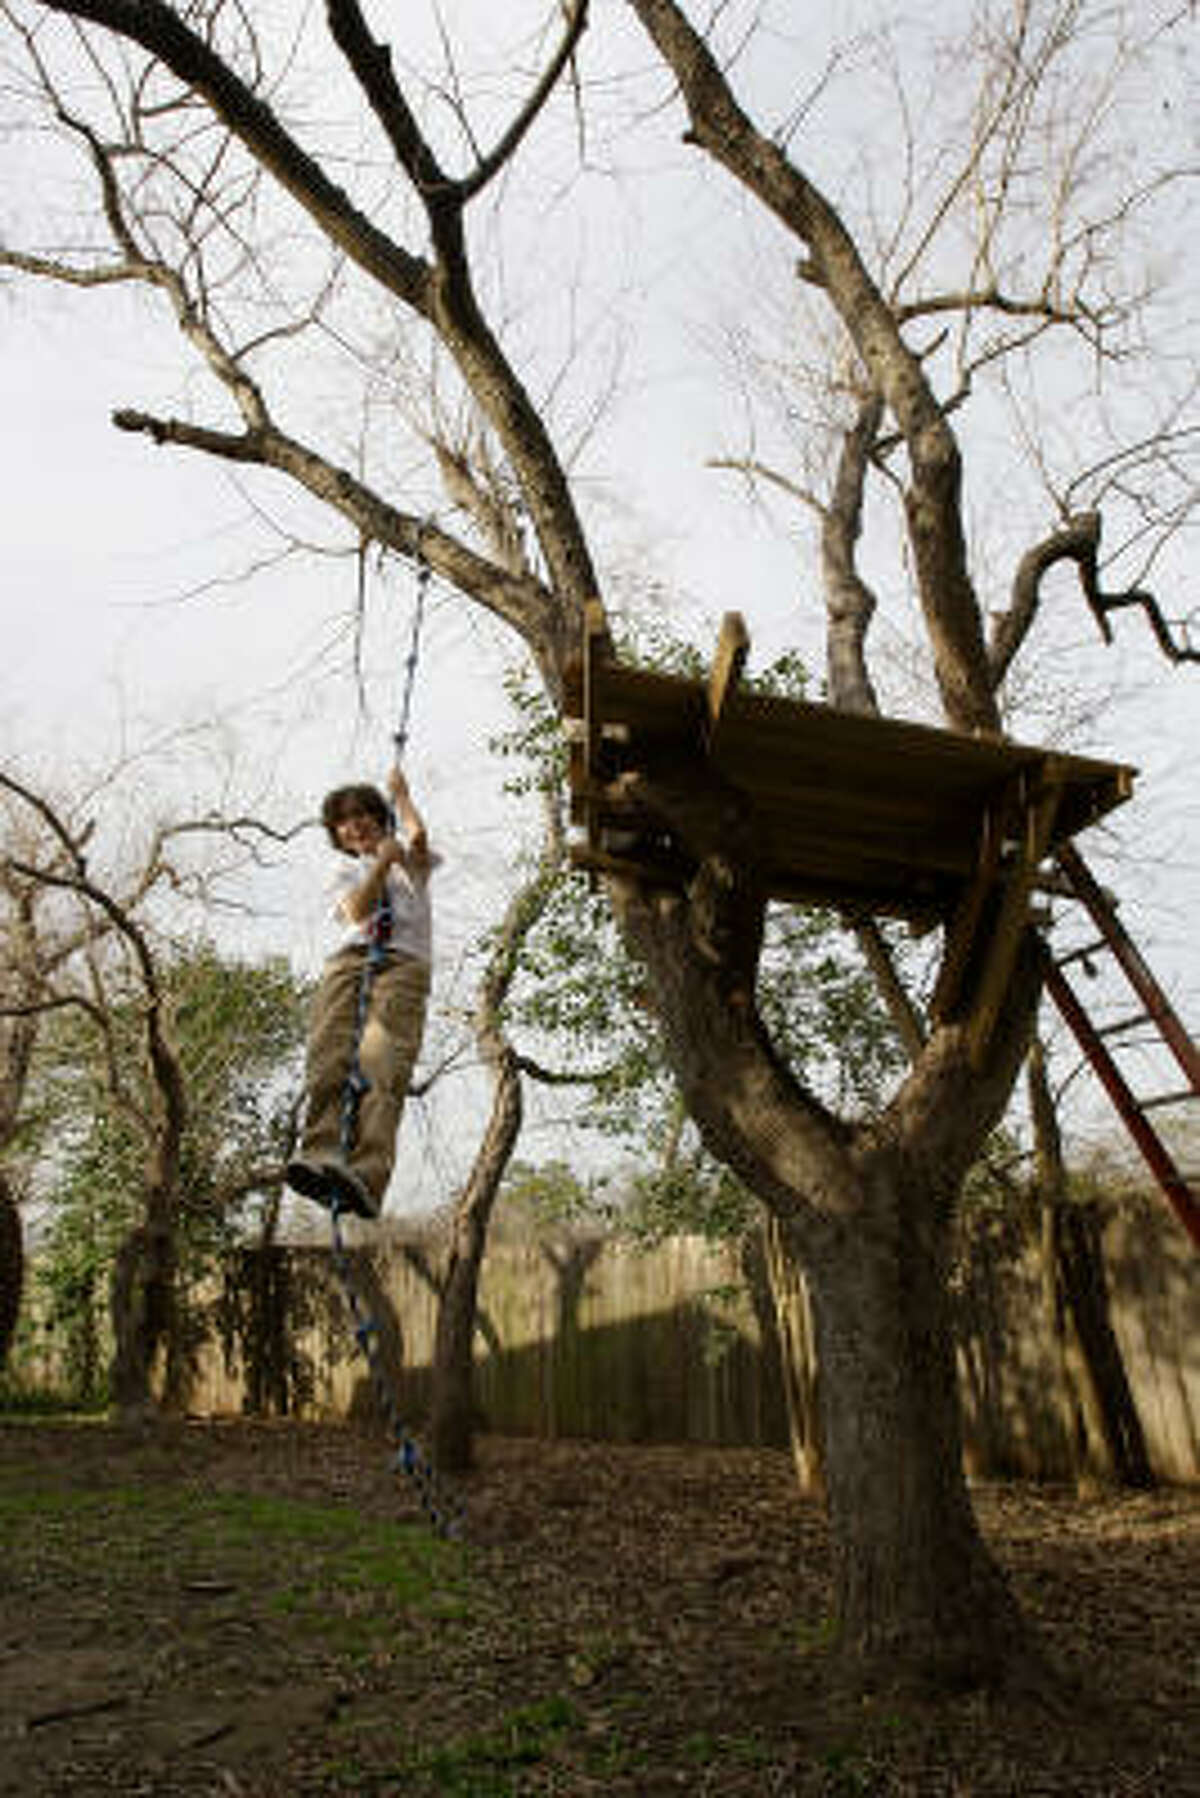 Ben Havlak, 11, son of Houston Chronicle writer Lisa Gray, has a treehouse in a backyard tallow tree. Tallow trees﻿ were once planted in Houston yards as ﻿ornamentals but are now elbowing out native plants﻿.